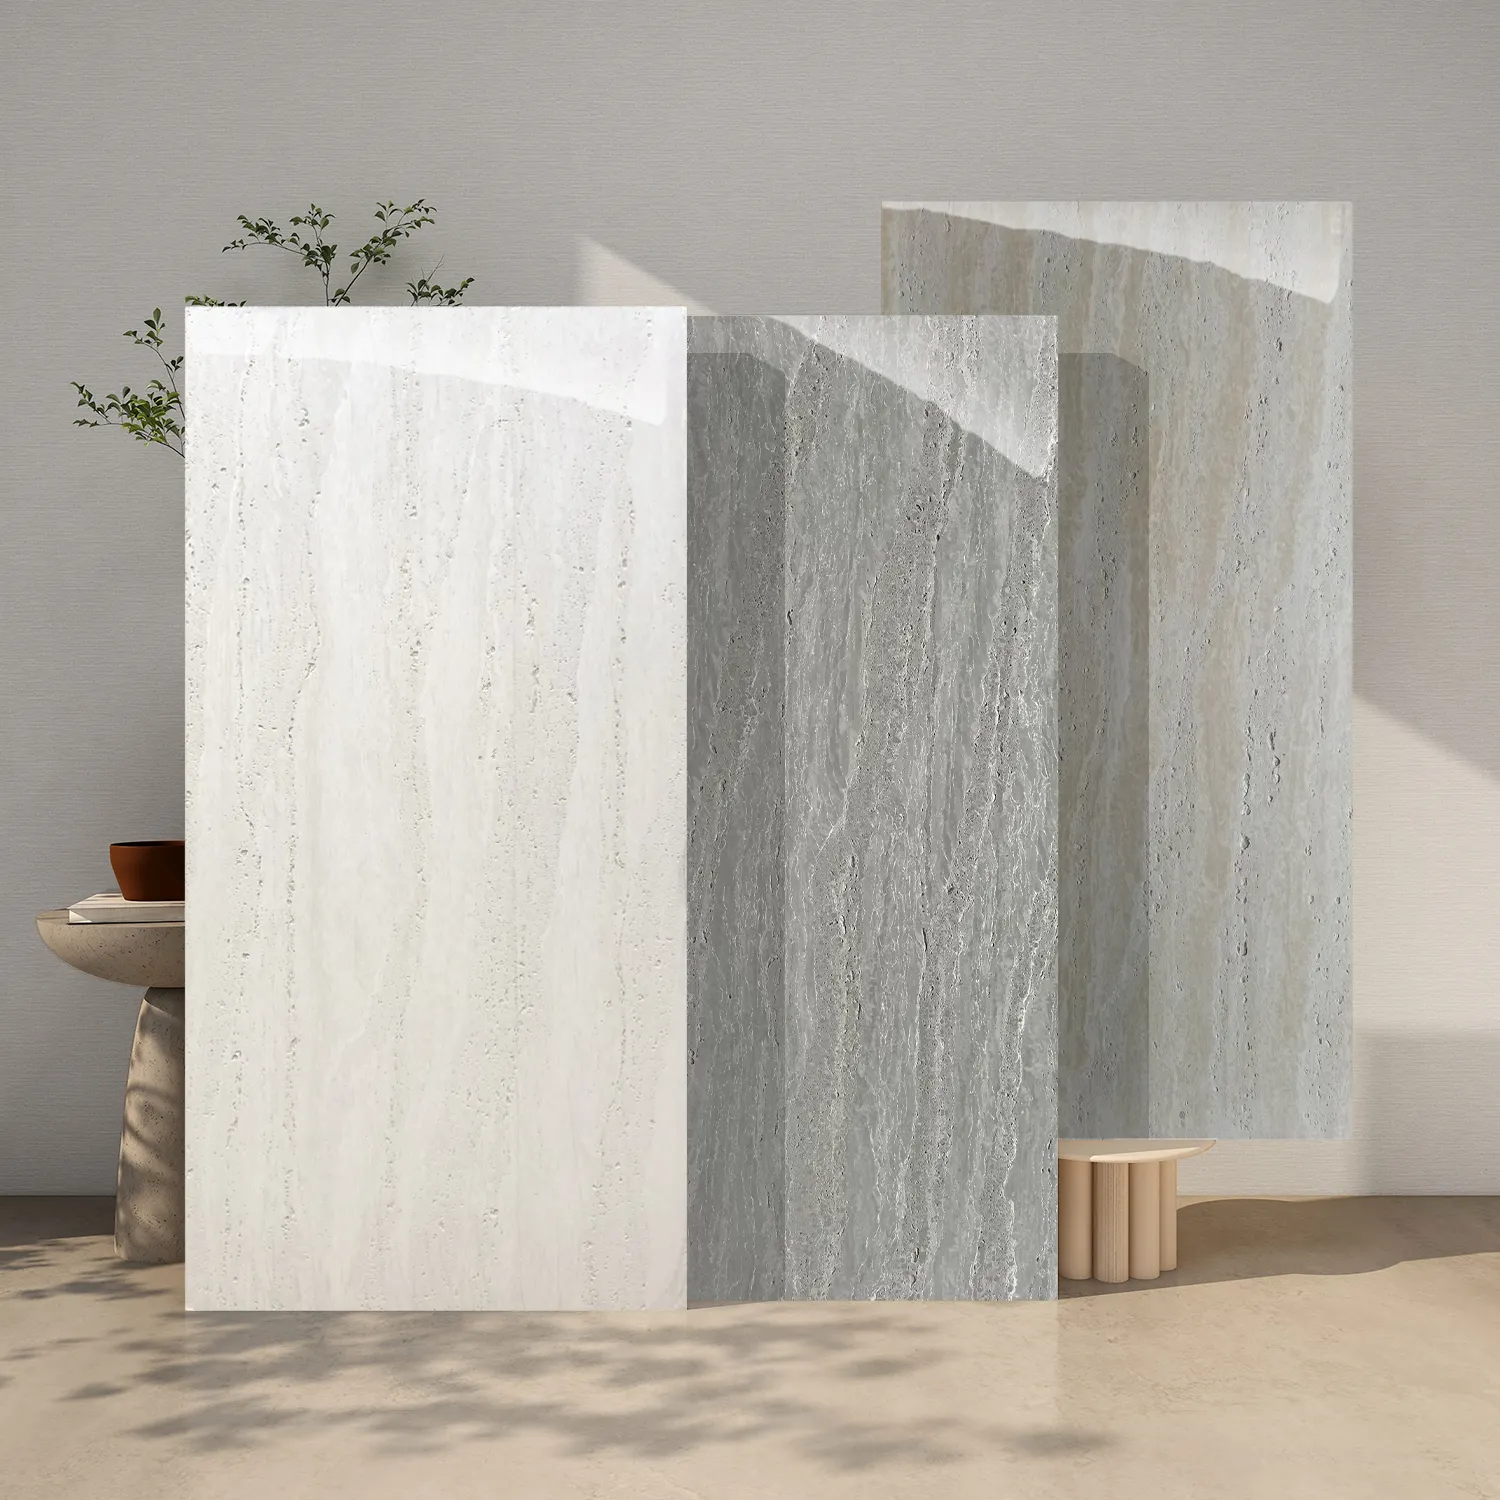 New material travertine marble samples offered interior exterior wall travertine stone tiles villa hotel and building 600*1200mm